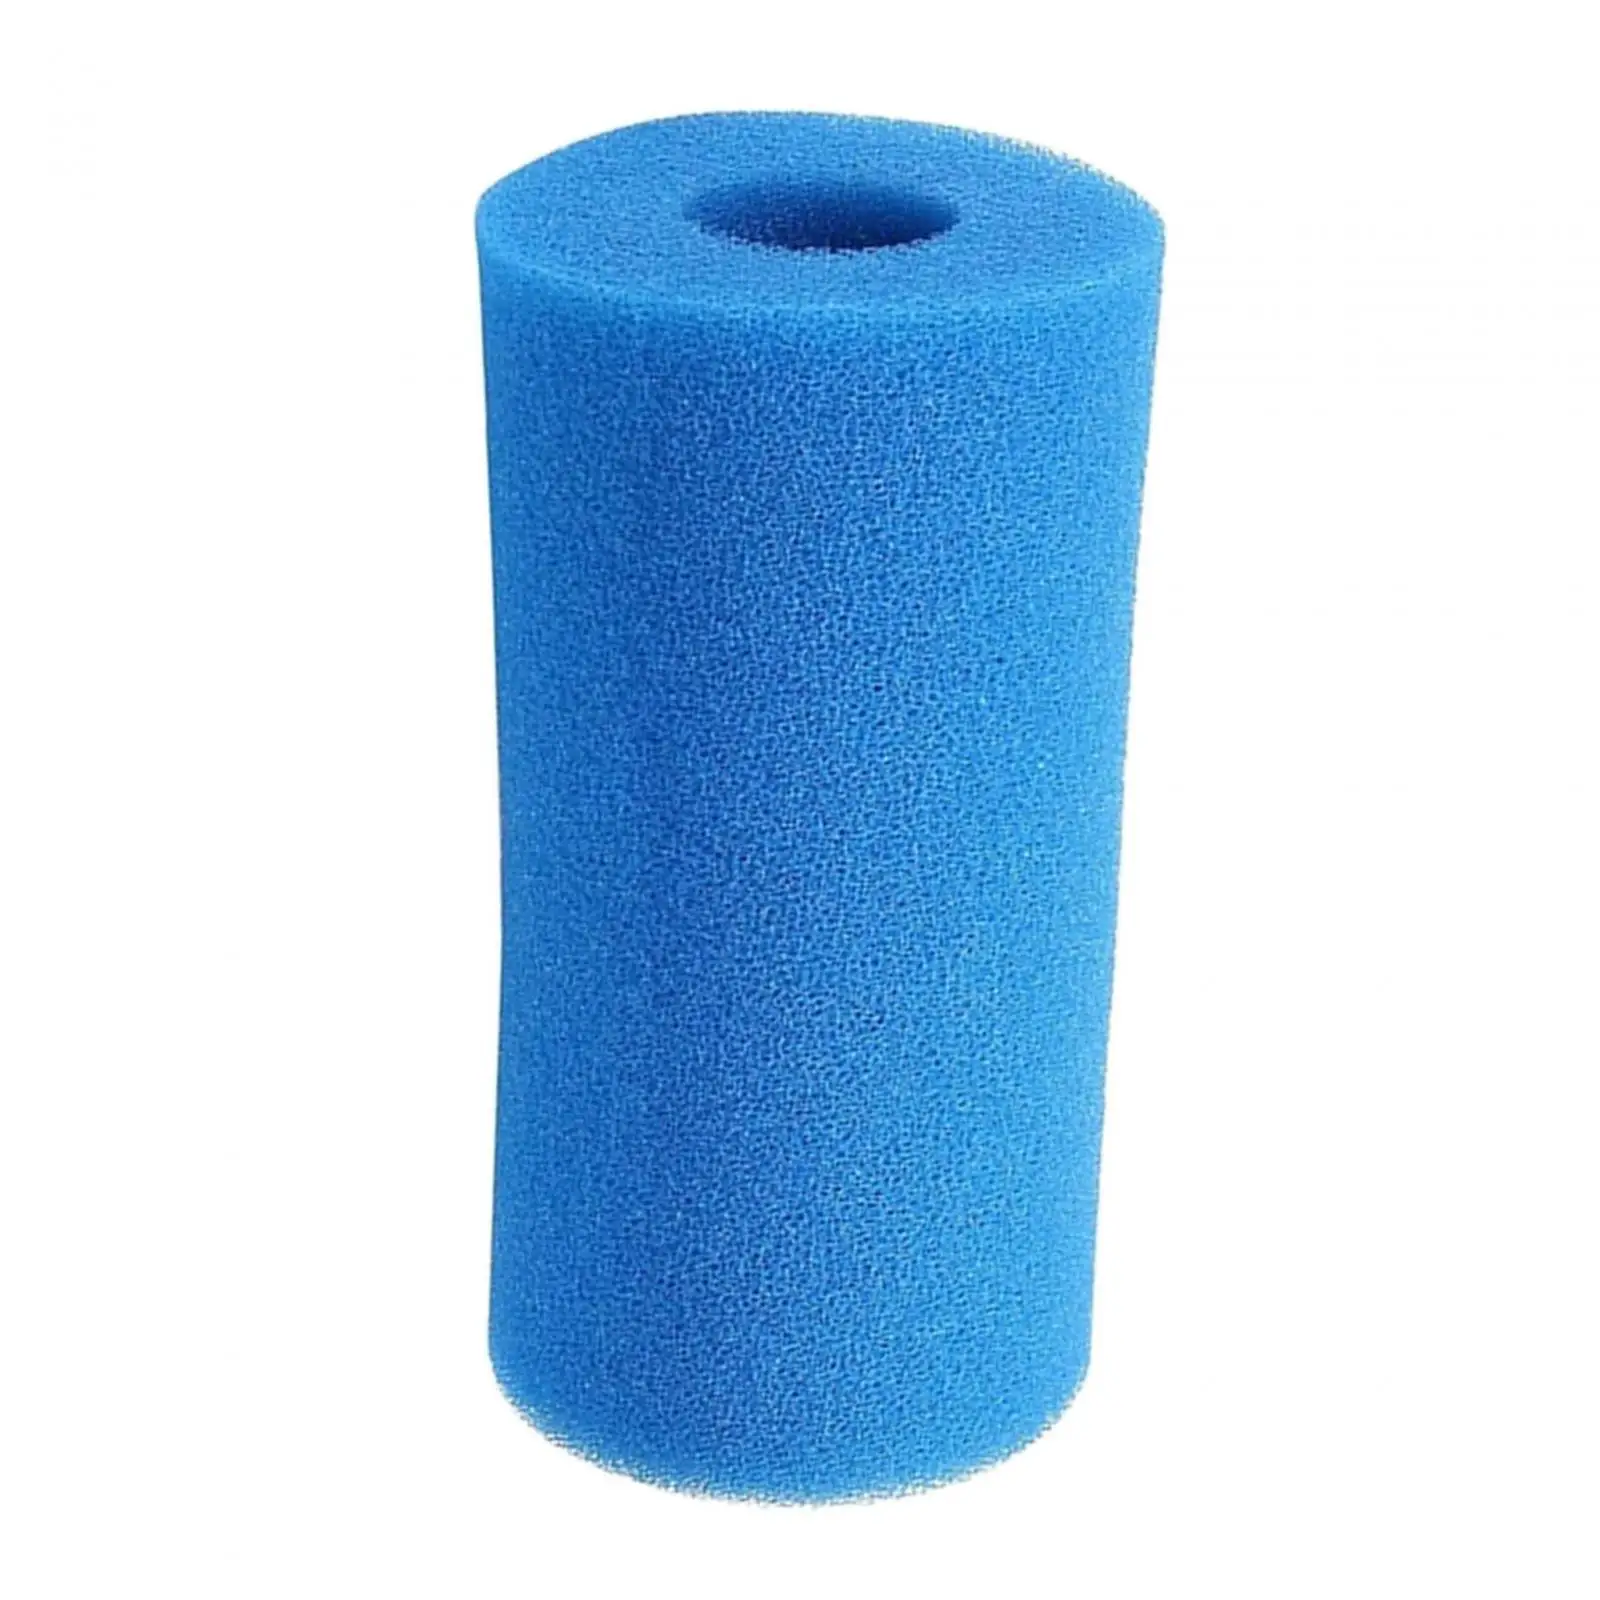 Pool Filter Cartridge Replace Parts Durable Filter Pump Cartridge for Type B